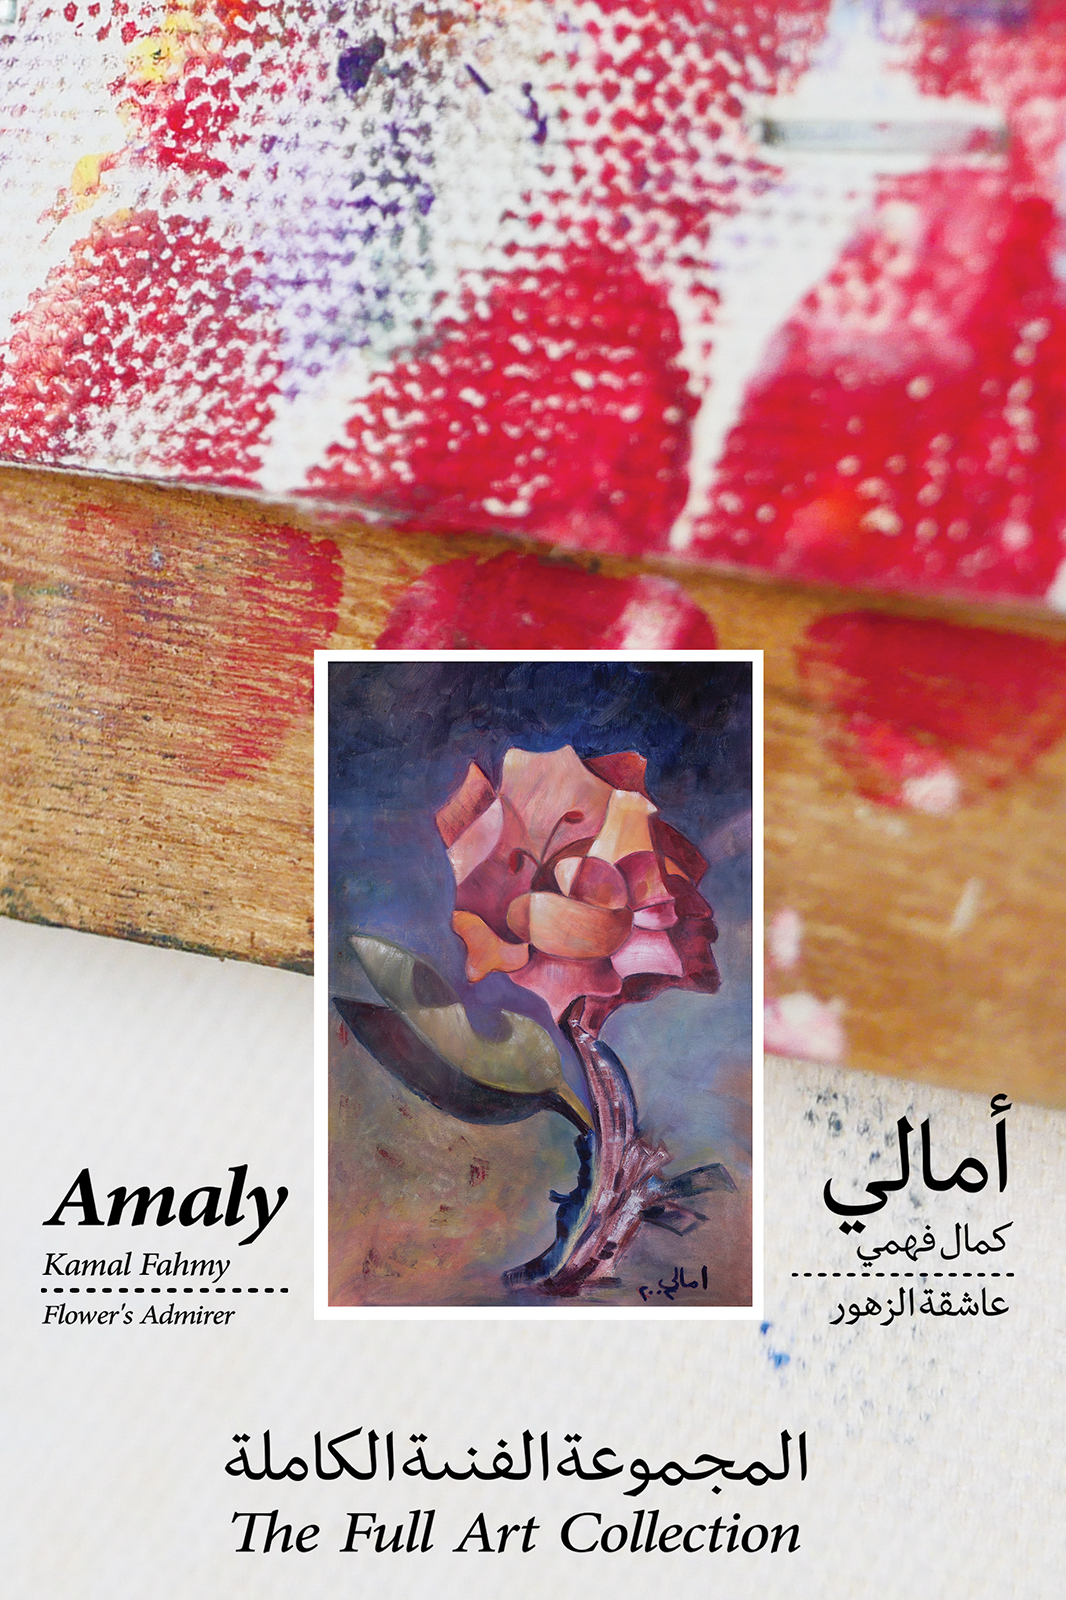 Amaly Kamal Fahmy – Flower’s Admirer – The Full Art Collection